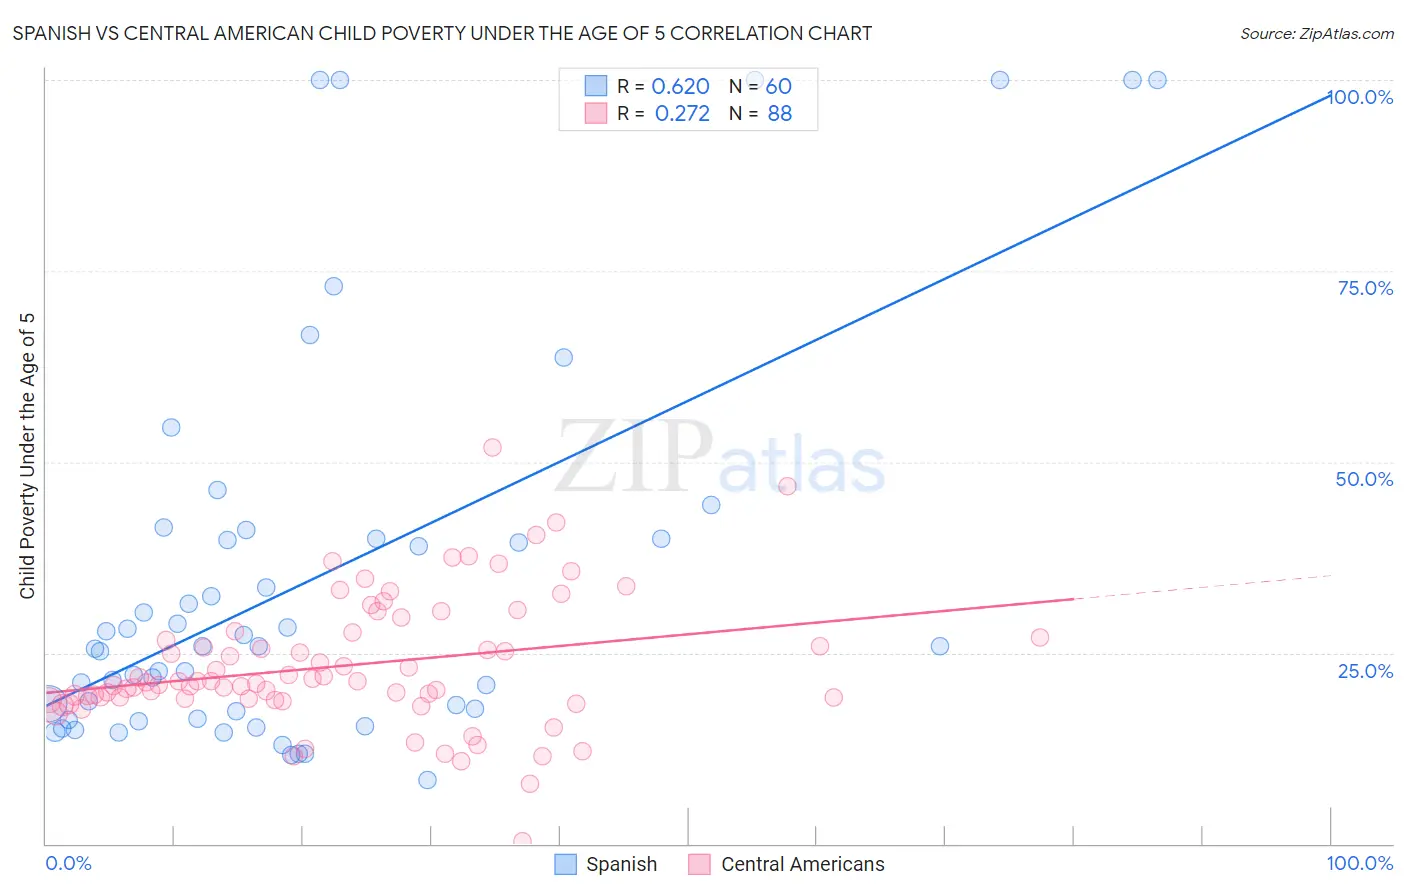 Spanish vs Central American Child Poverty Under the Age of 5